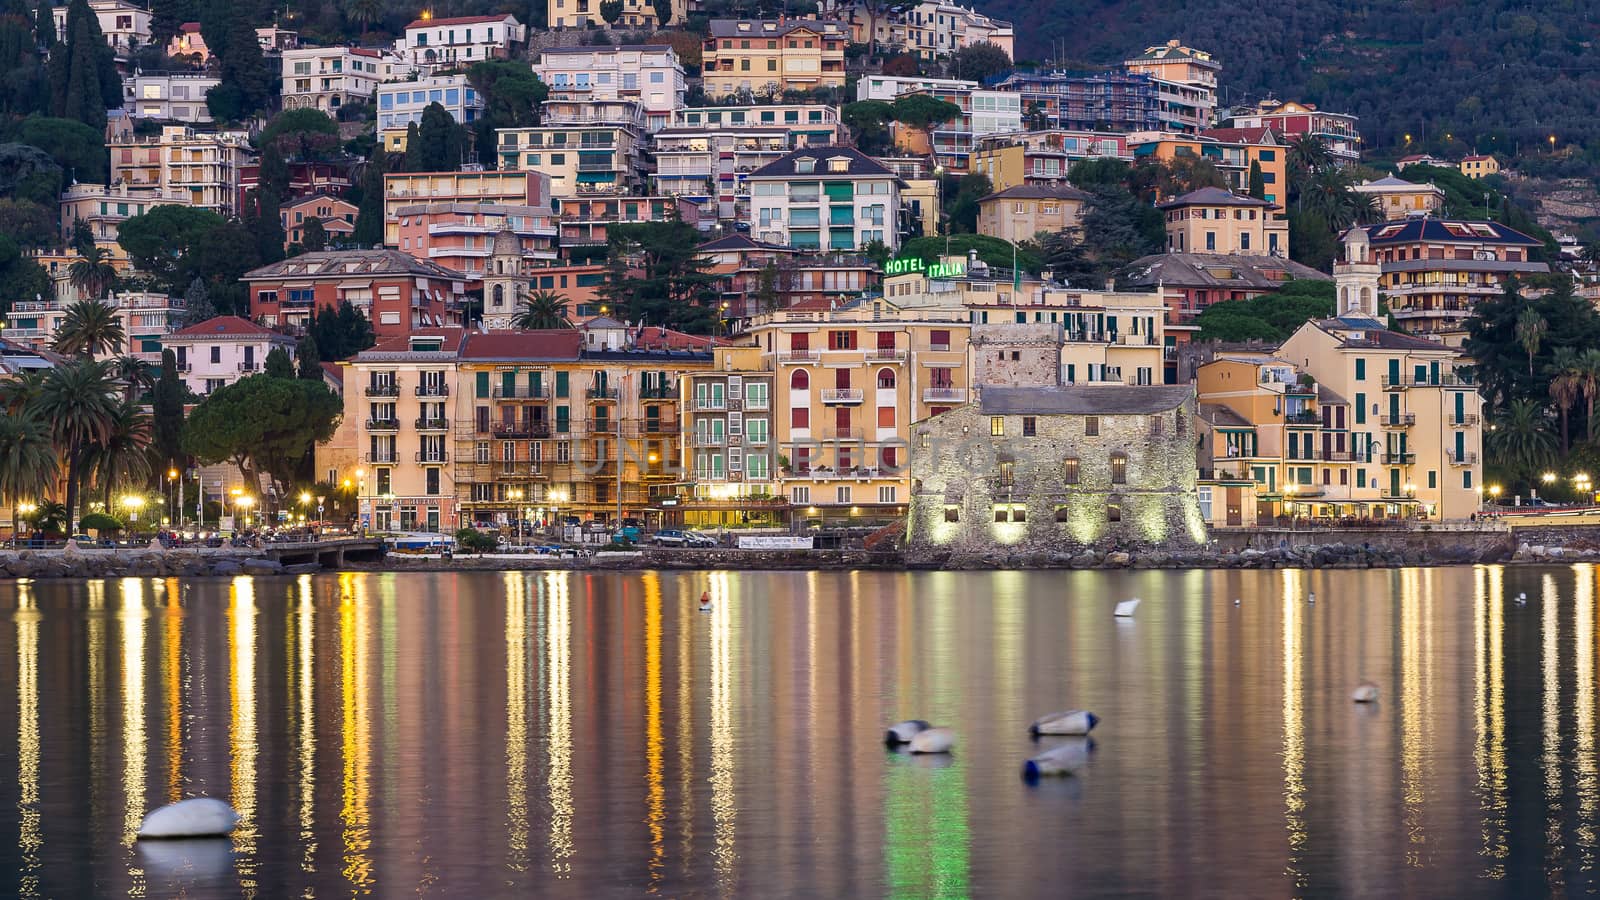 View over the ligurian village of Rapallo, Italy